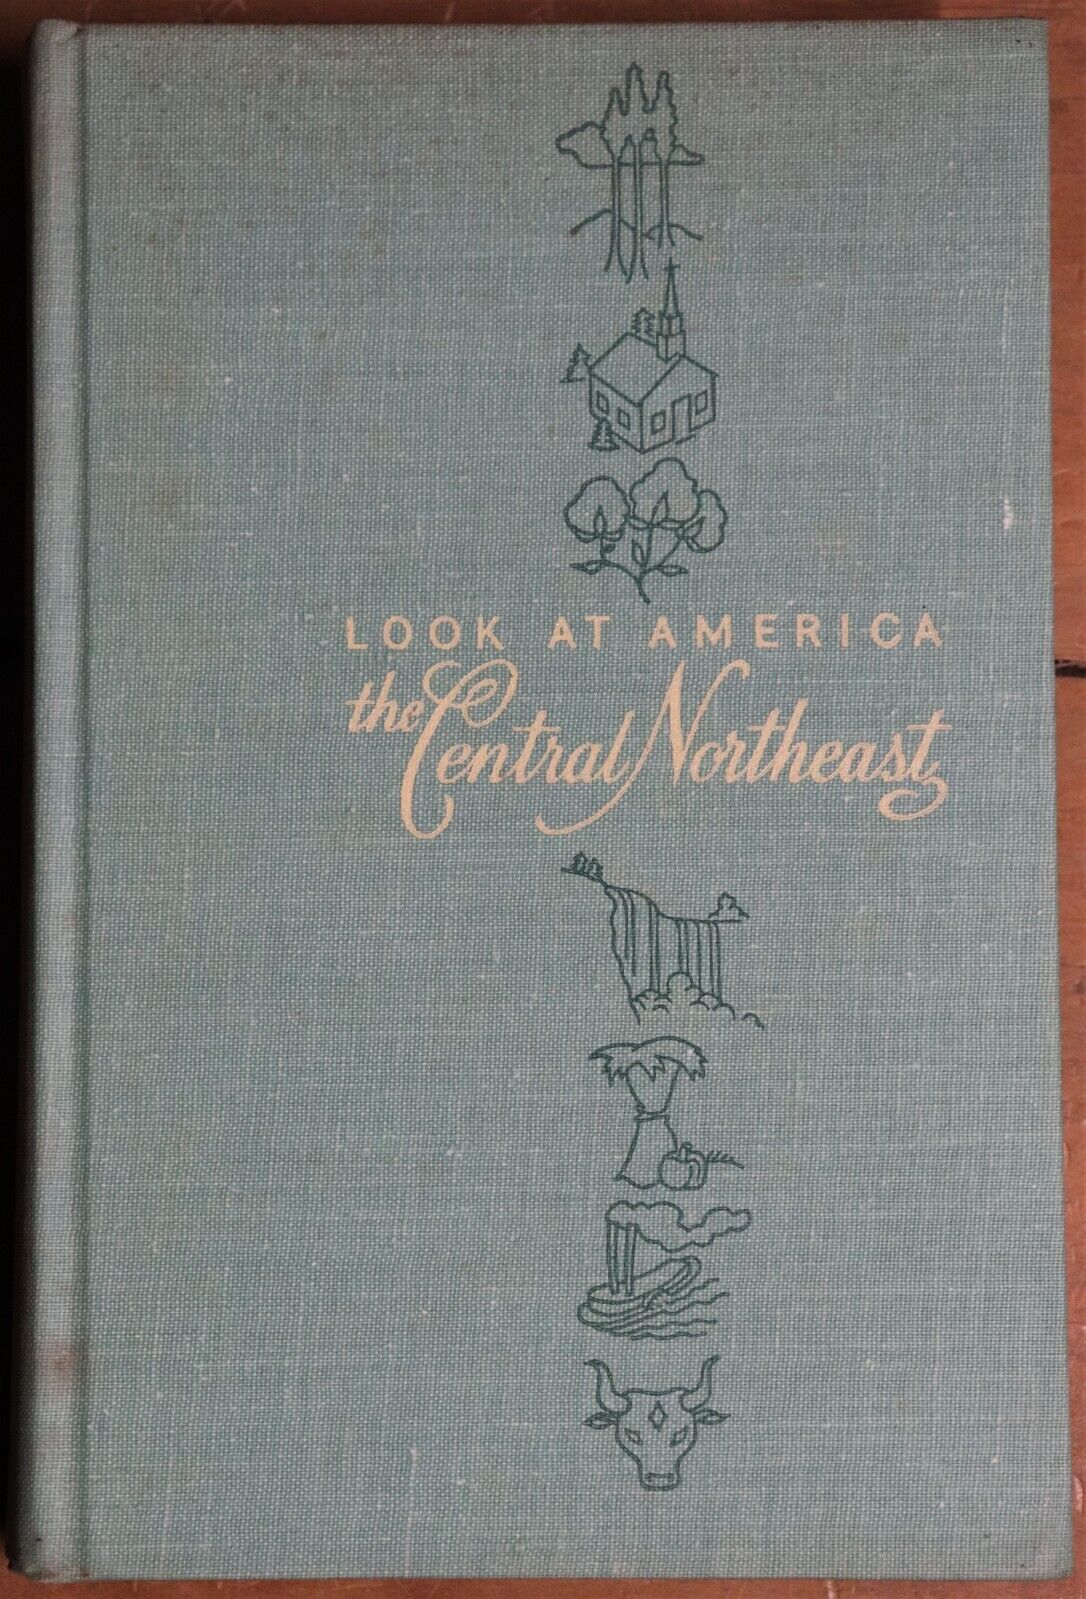 Look at America: The Central Northeast - 1948 - 1st Edition Vintage Book